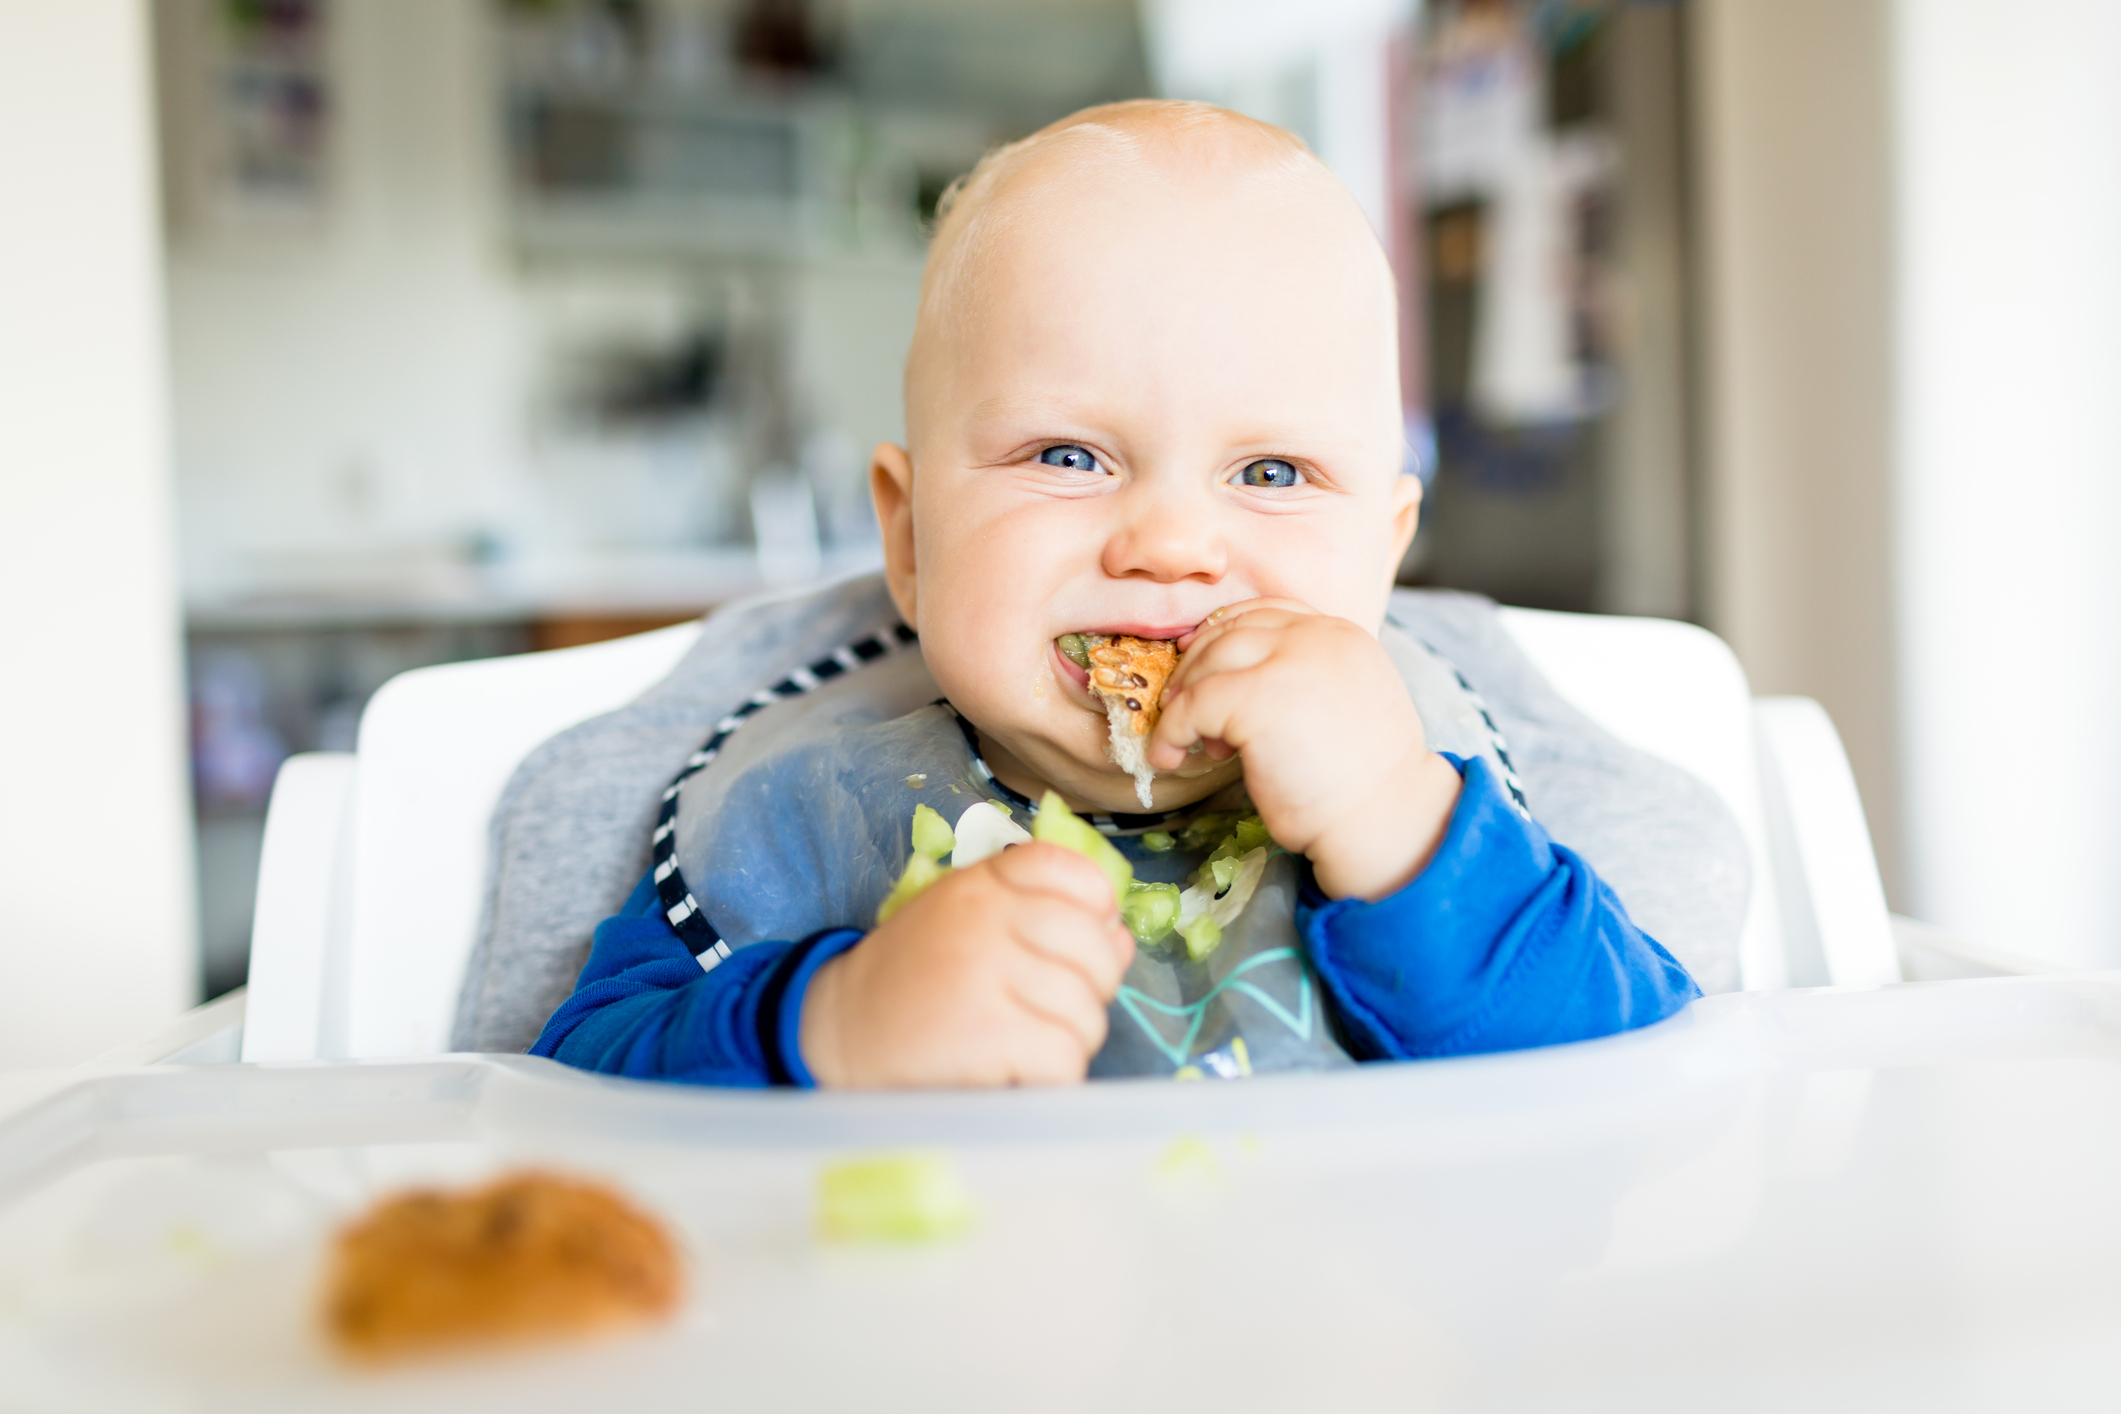 Baby-Led Weaning is a New Way of Feeding Your Baby - Learn More